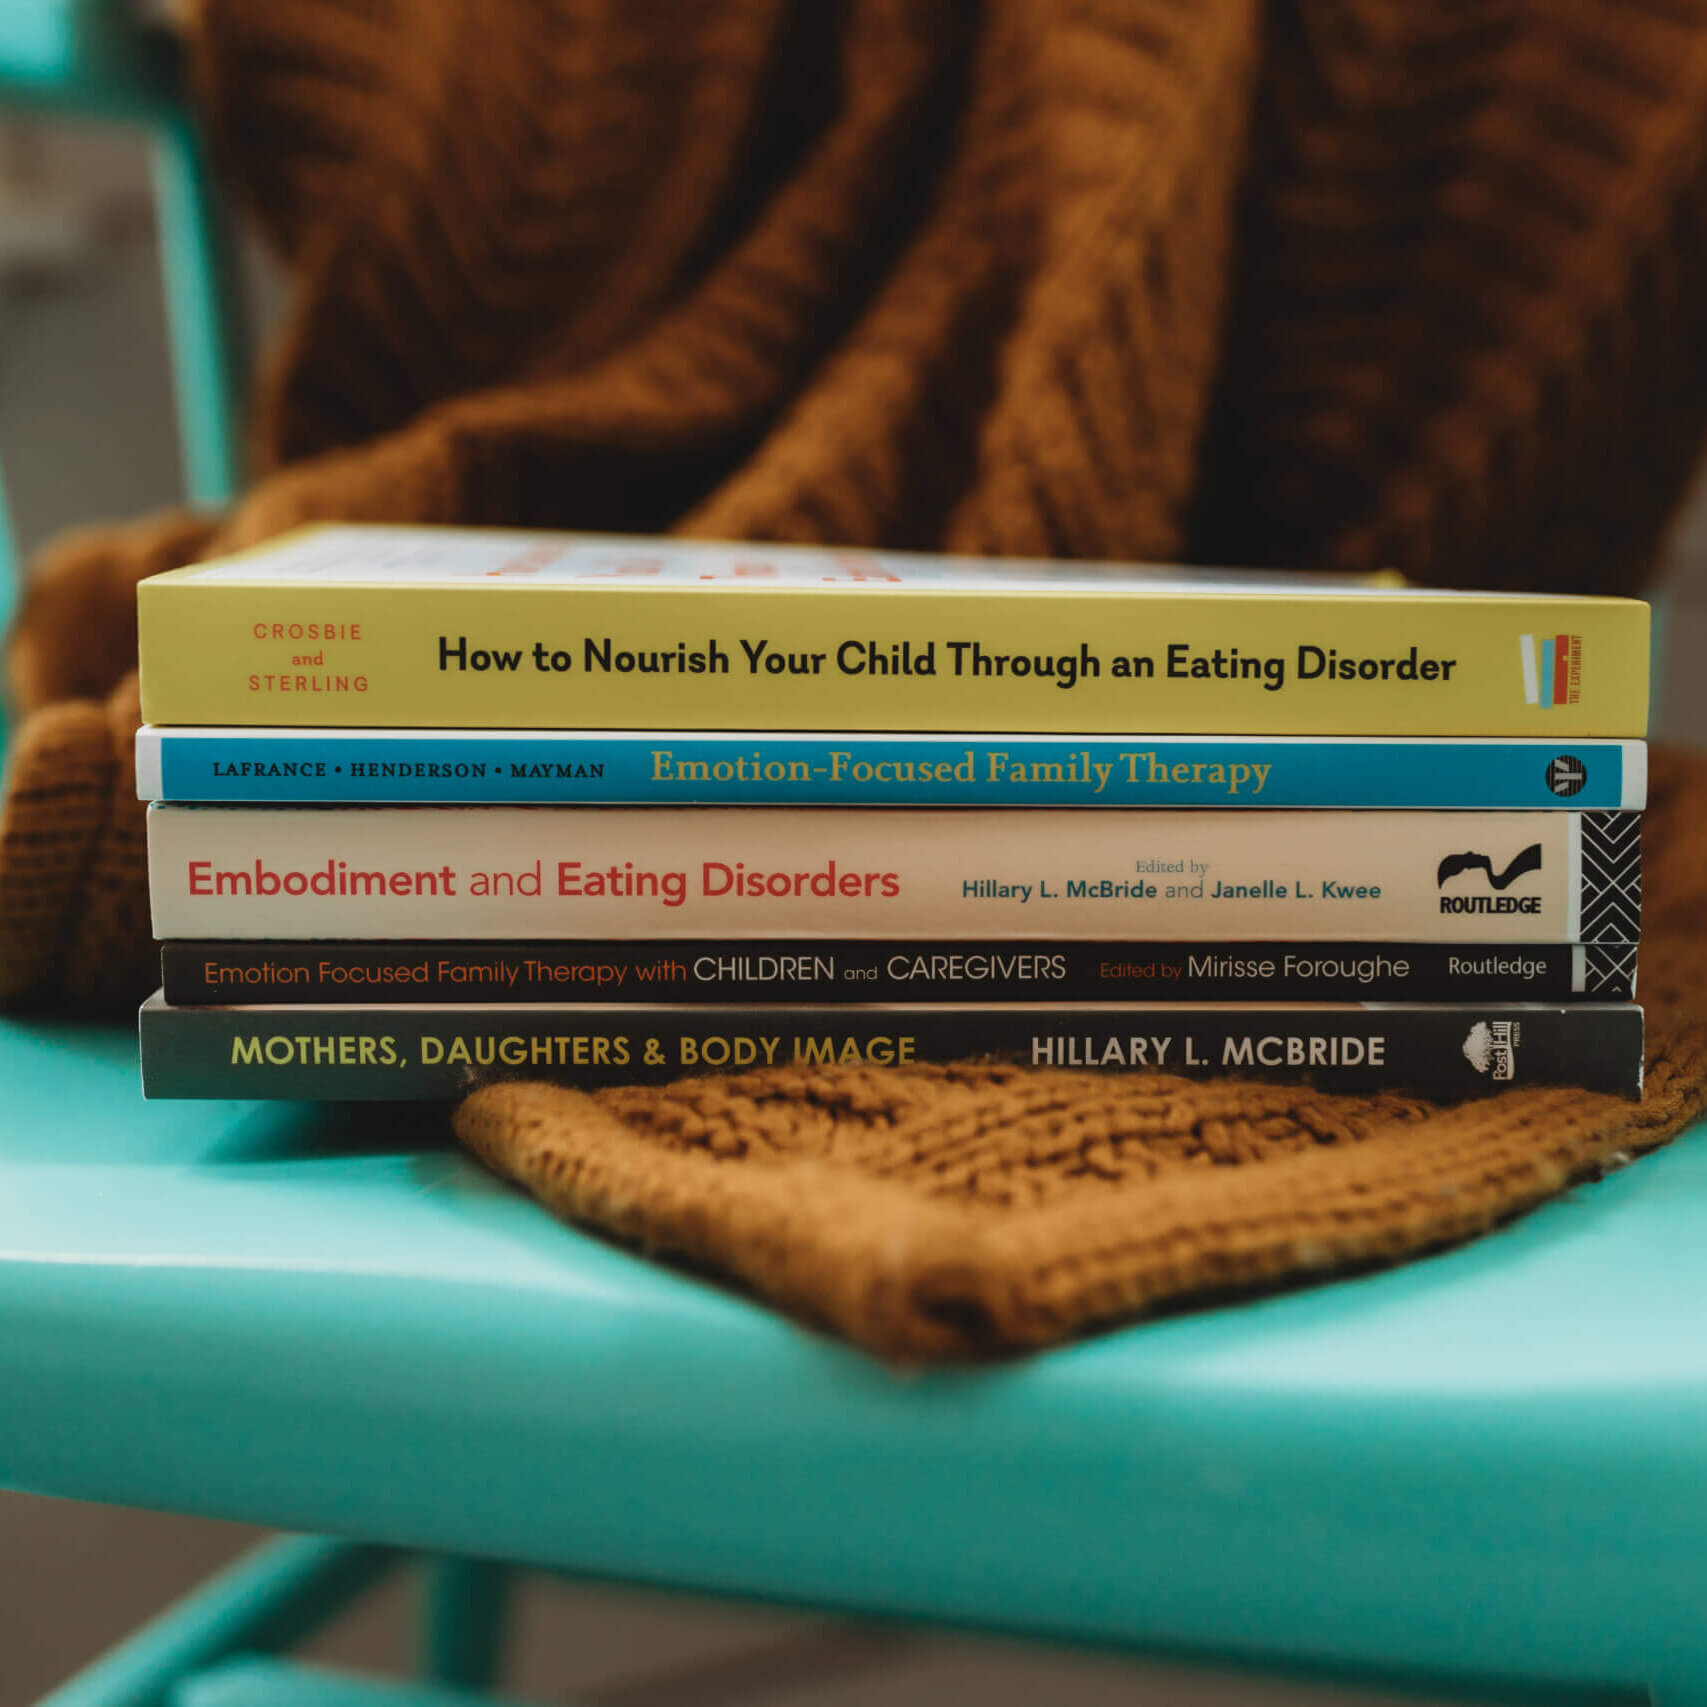 A stack of books about eating disorders is placed on a bright blue wooden chair.